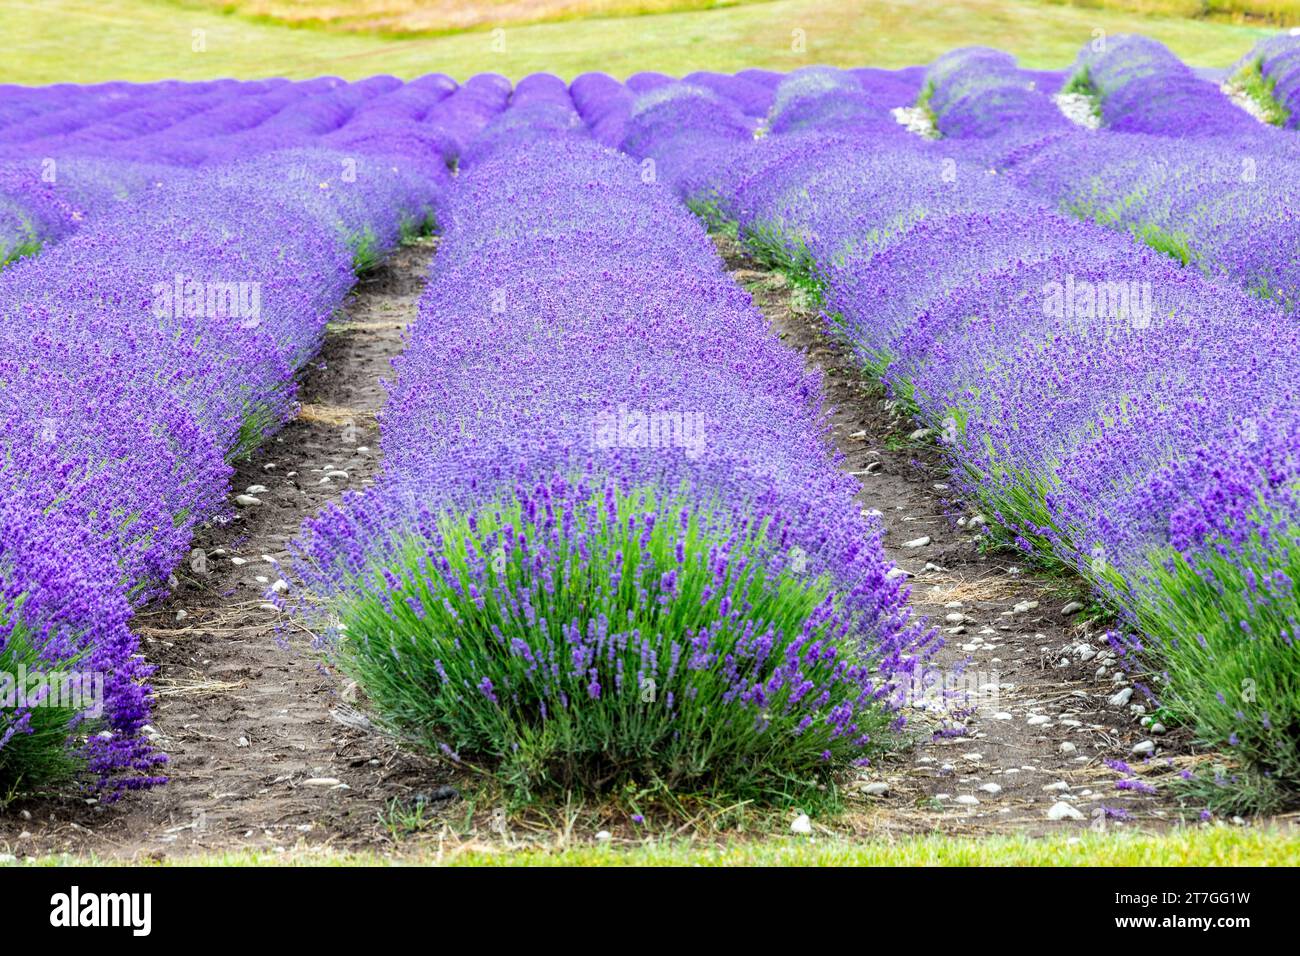 New Zealand, attraction of a lavender farm. Lavender has medicinal properties as well as being a popular fragrance Stock Photo